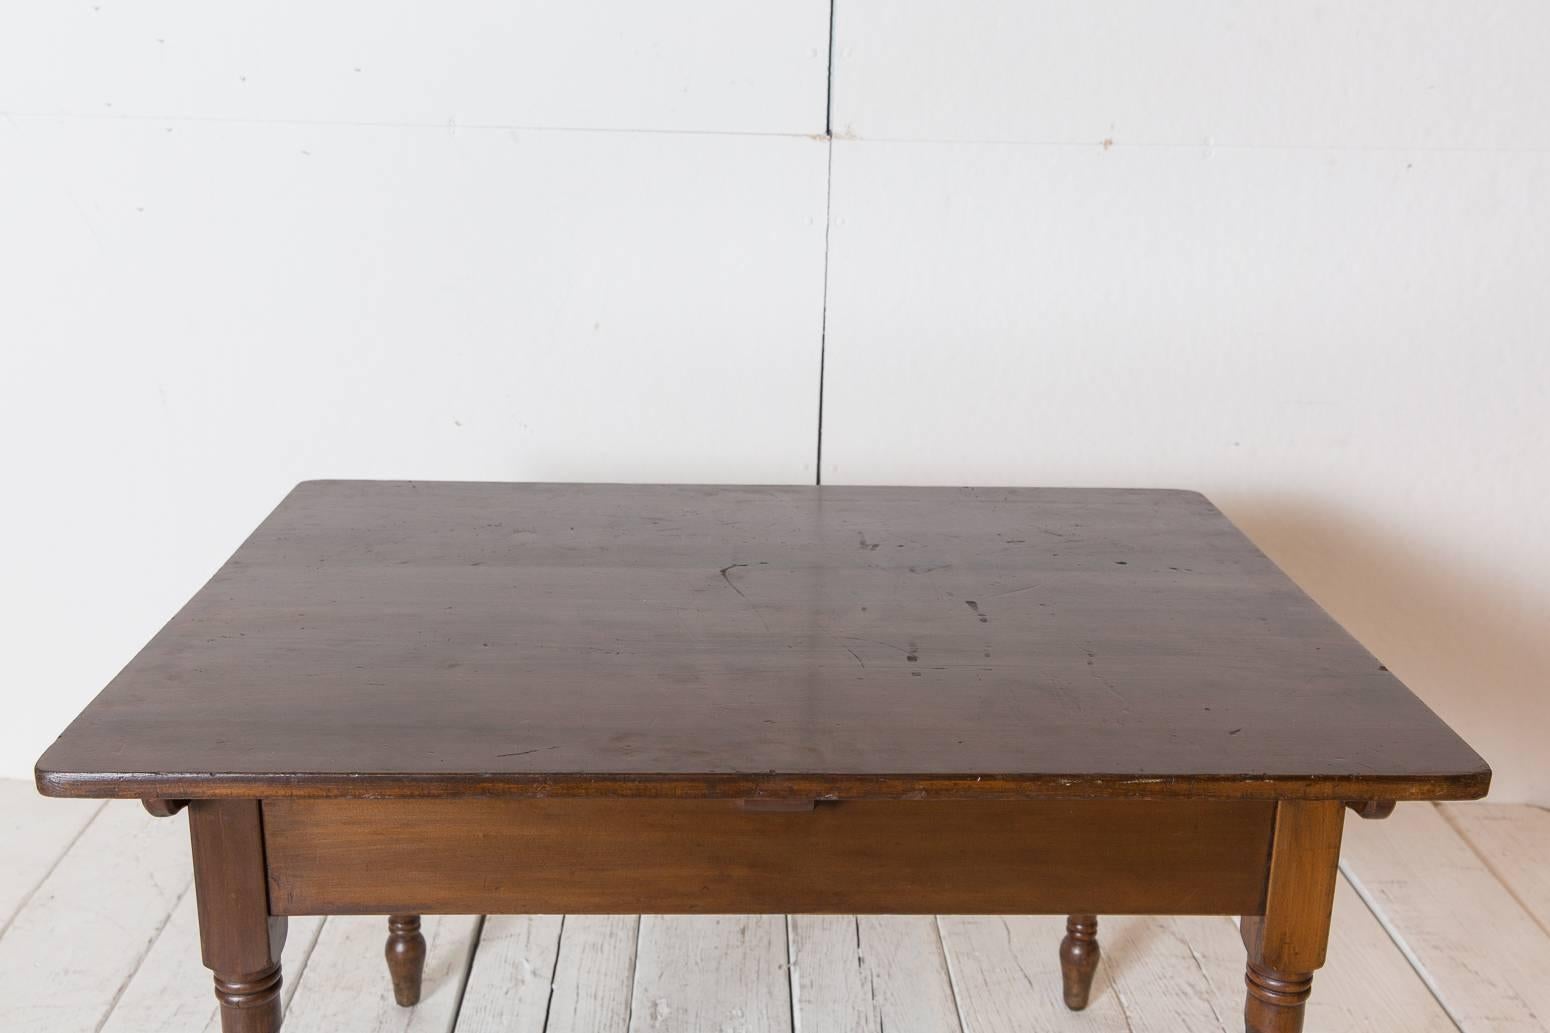 Wood Dark Oak Stained Farm Table with Turned Legs